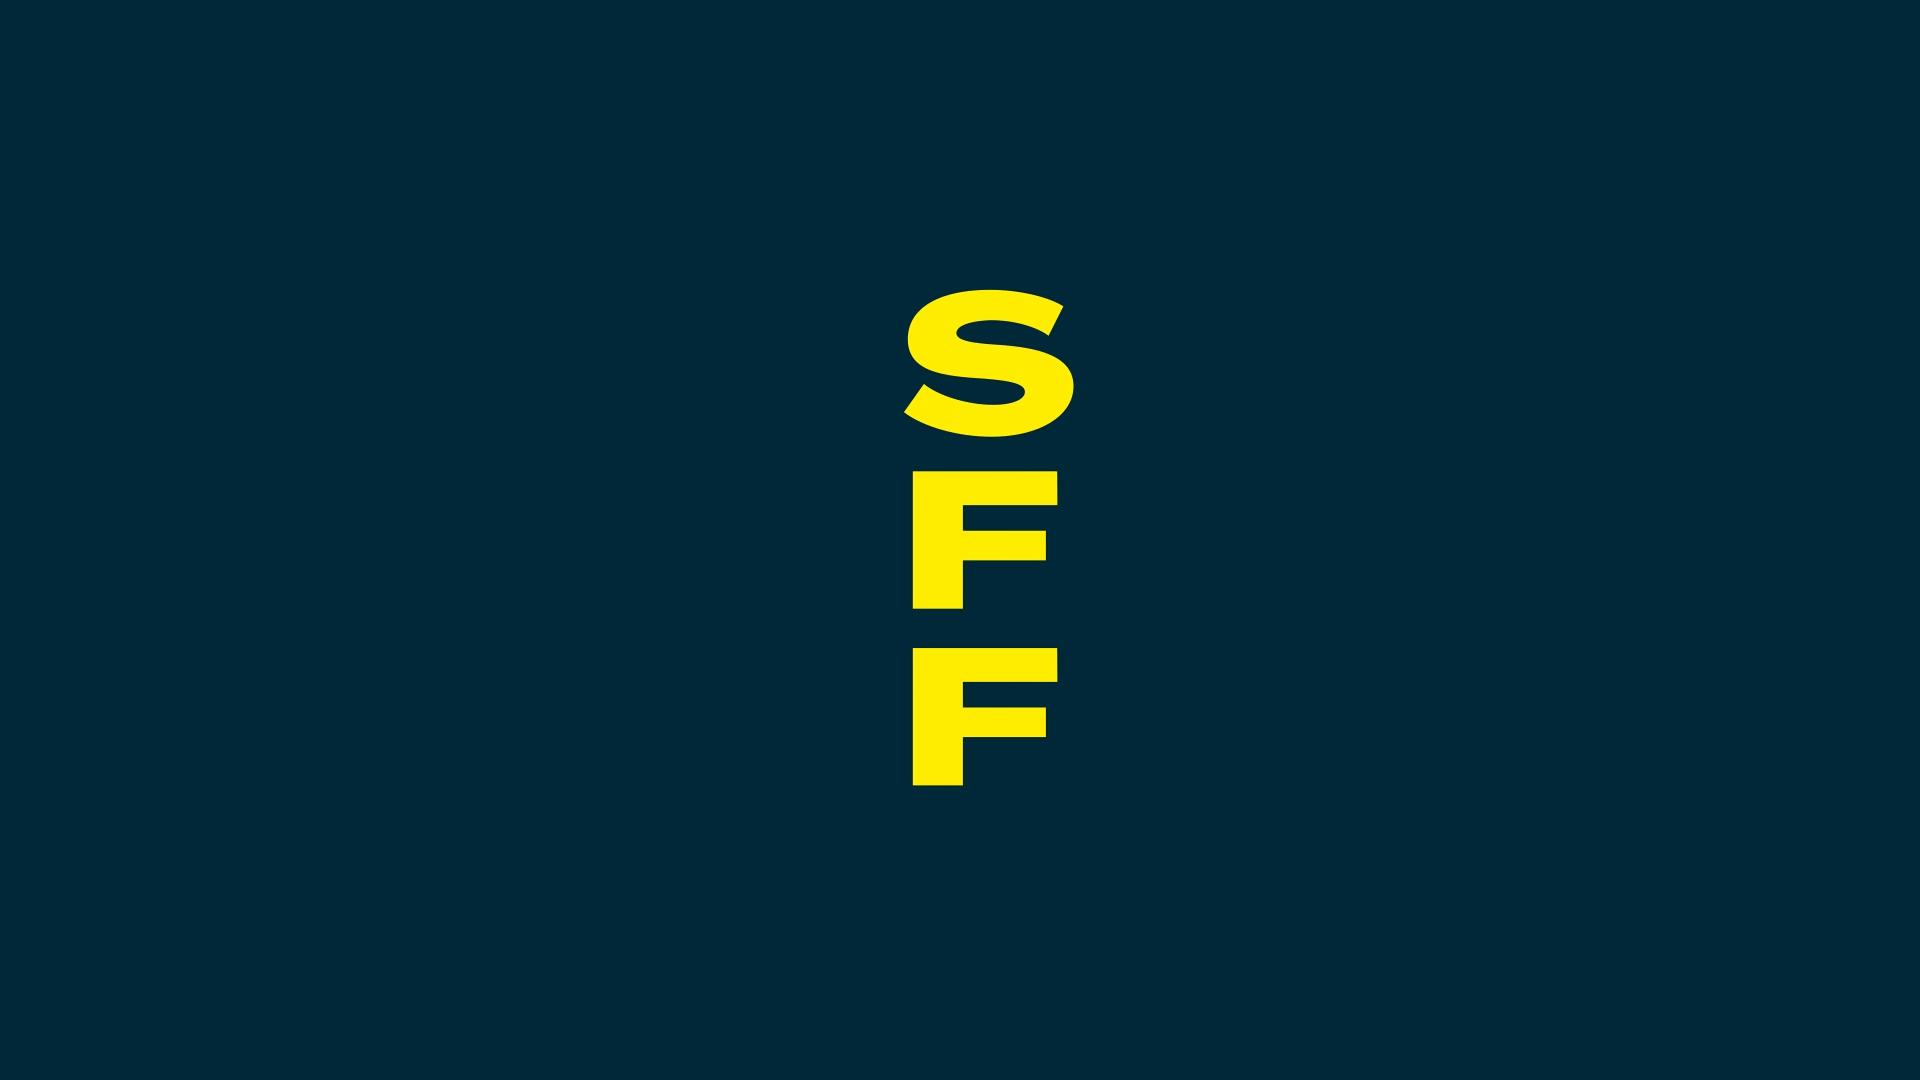 New Logo and Identity for Sydney Film Festival by For the People